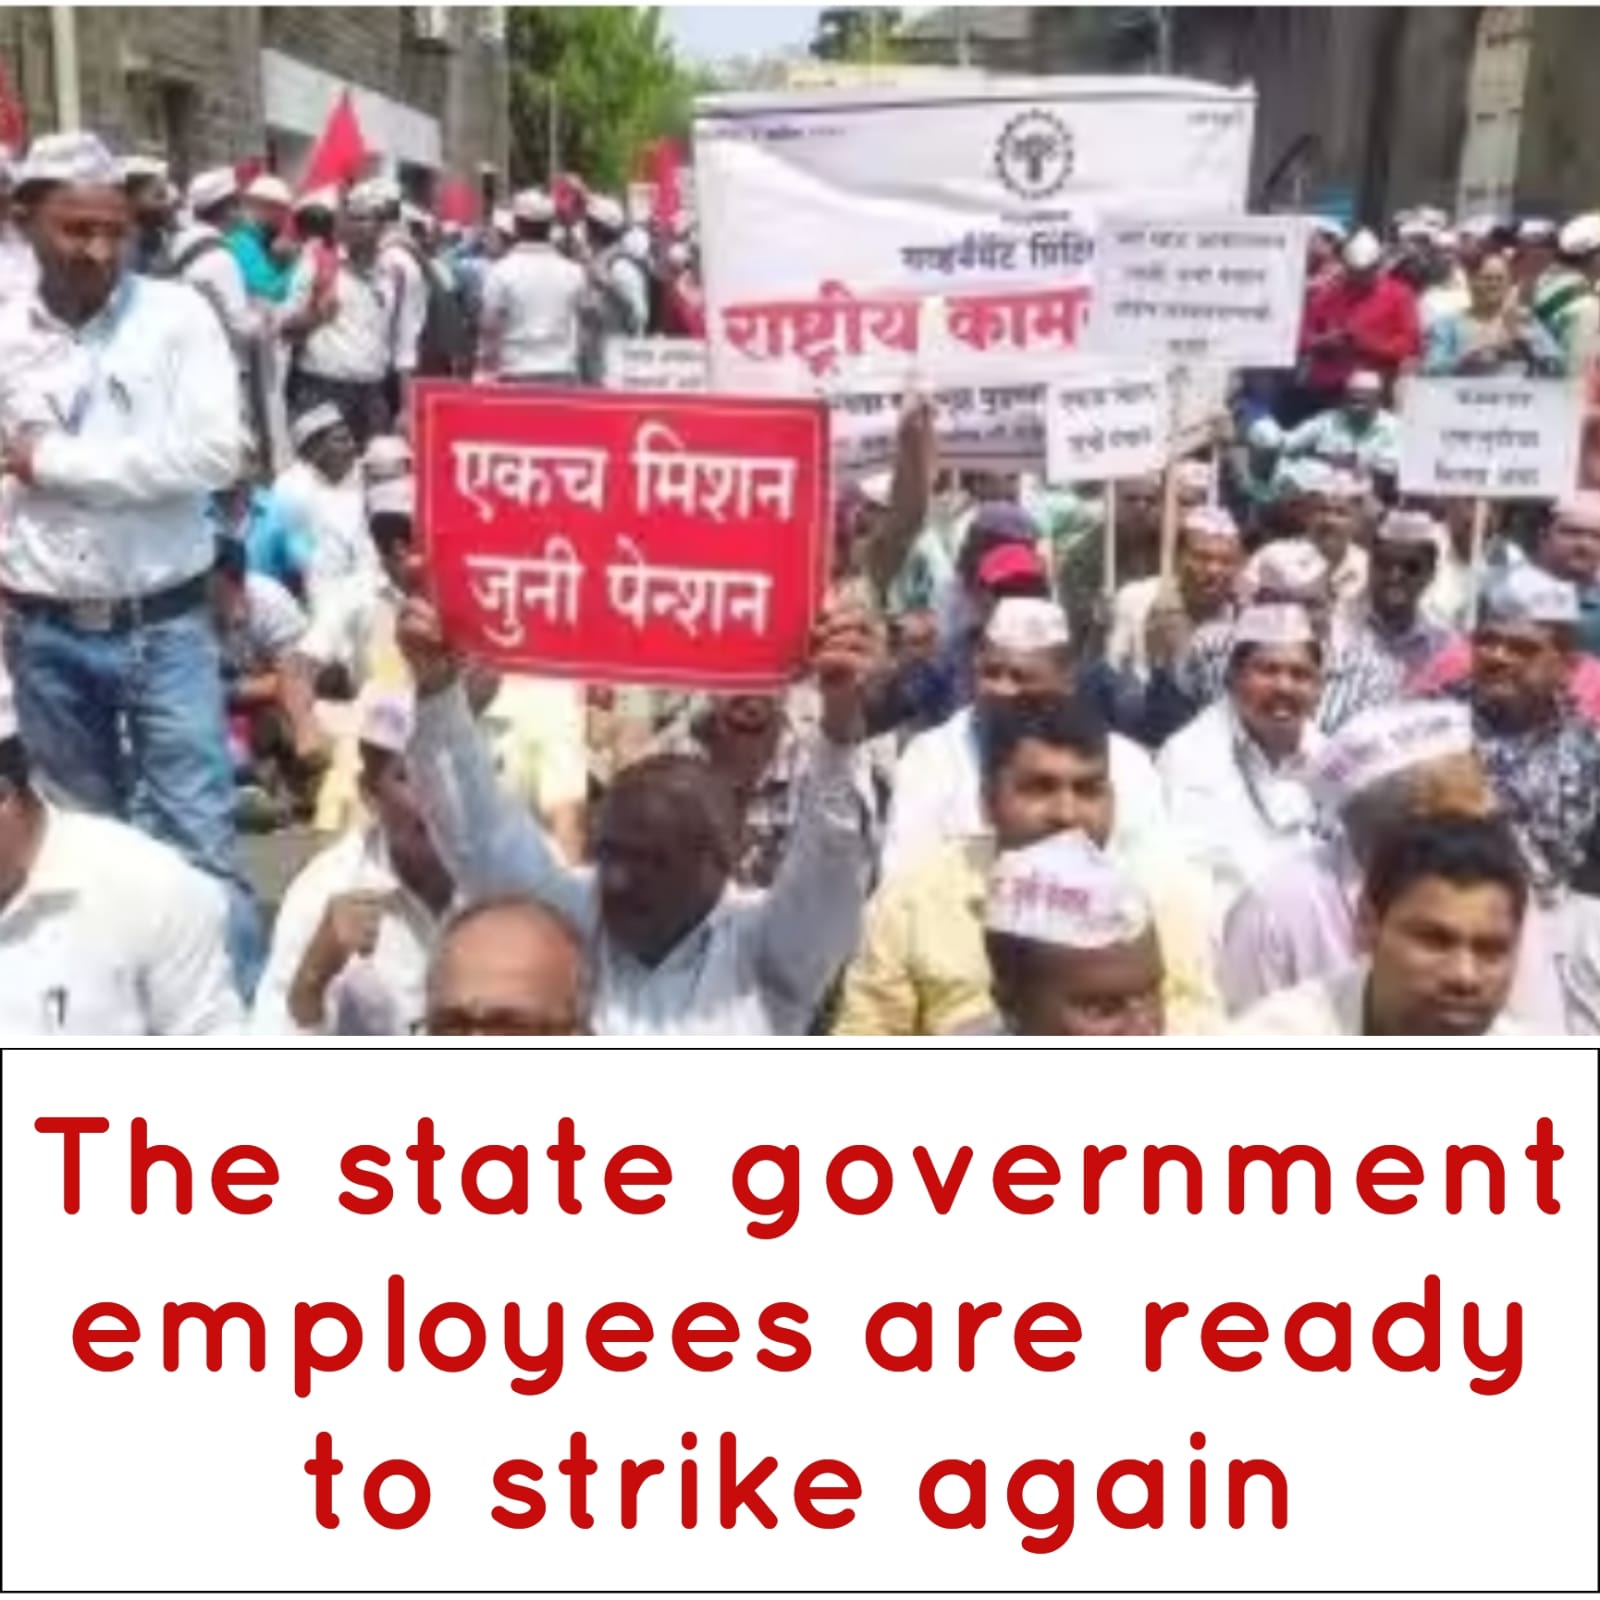 The state government employees are ready to strike again